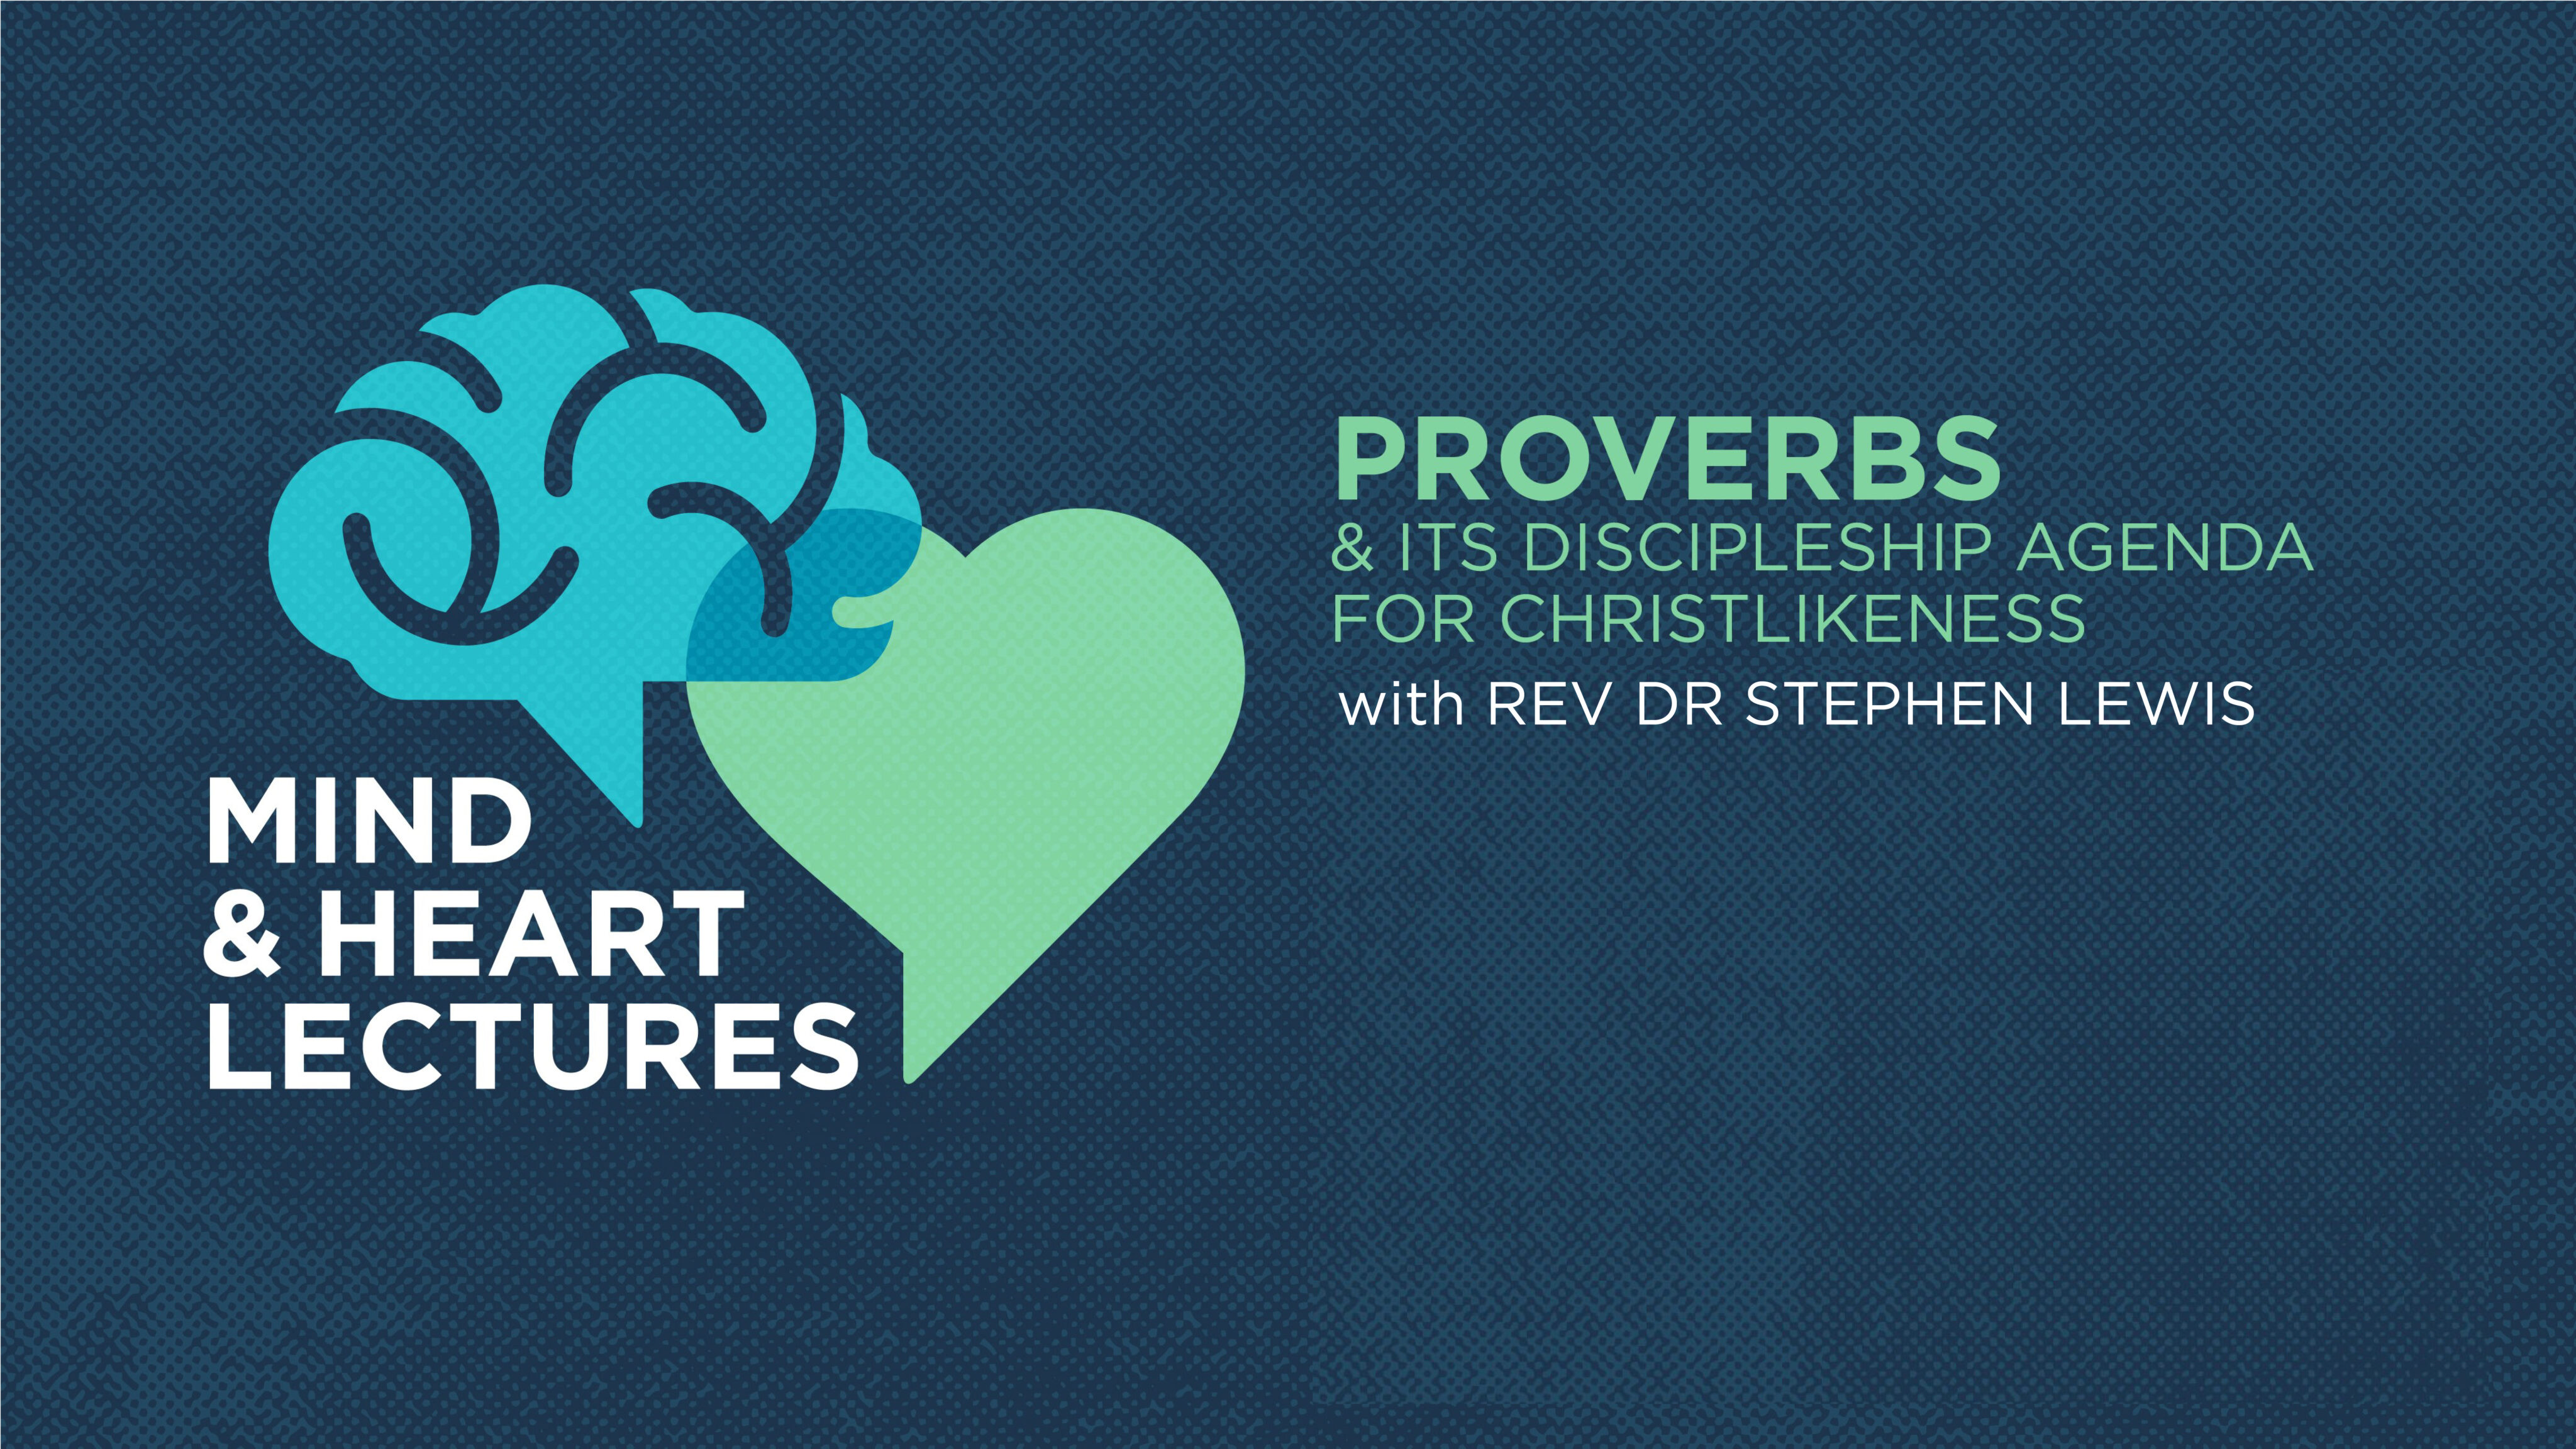 Proverbs & its discipleship agenda for Christlikeness - Rev Dr Stephen Lewis March 2023